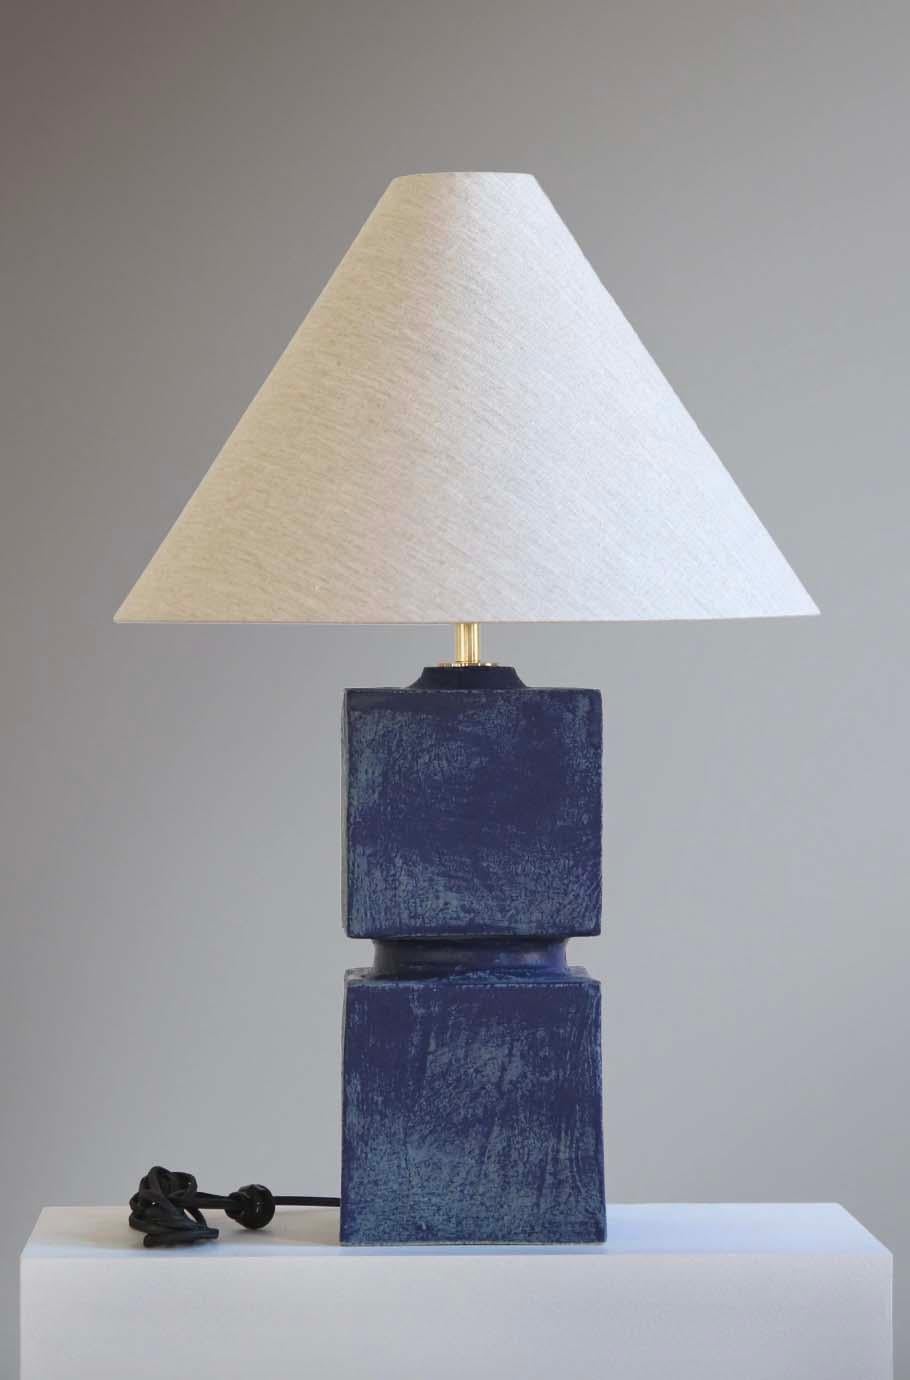 The Talis lamp is handmade studio pottery by ceramic artist by Danny Kaplan. Shade included. Please note exact dimensions may vary.

Born in New York City and raised in Aix-en-Provence, France, Danny Kaplan’s passion for ceramics was shaped by early